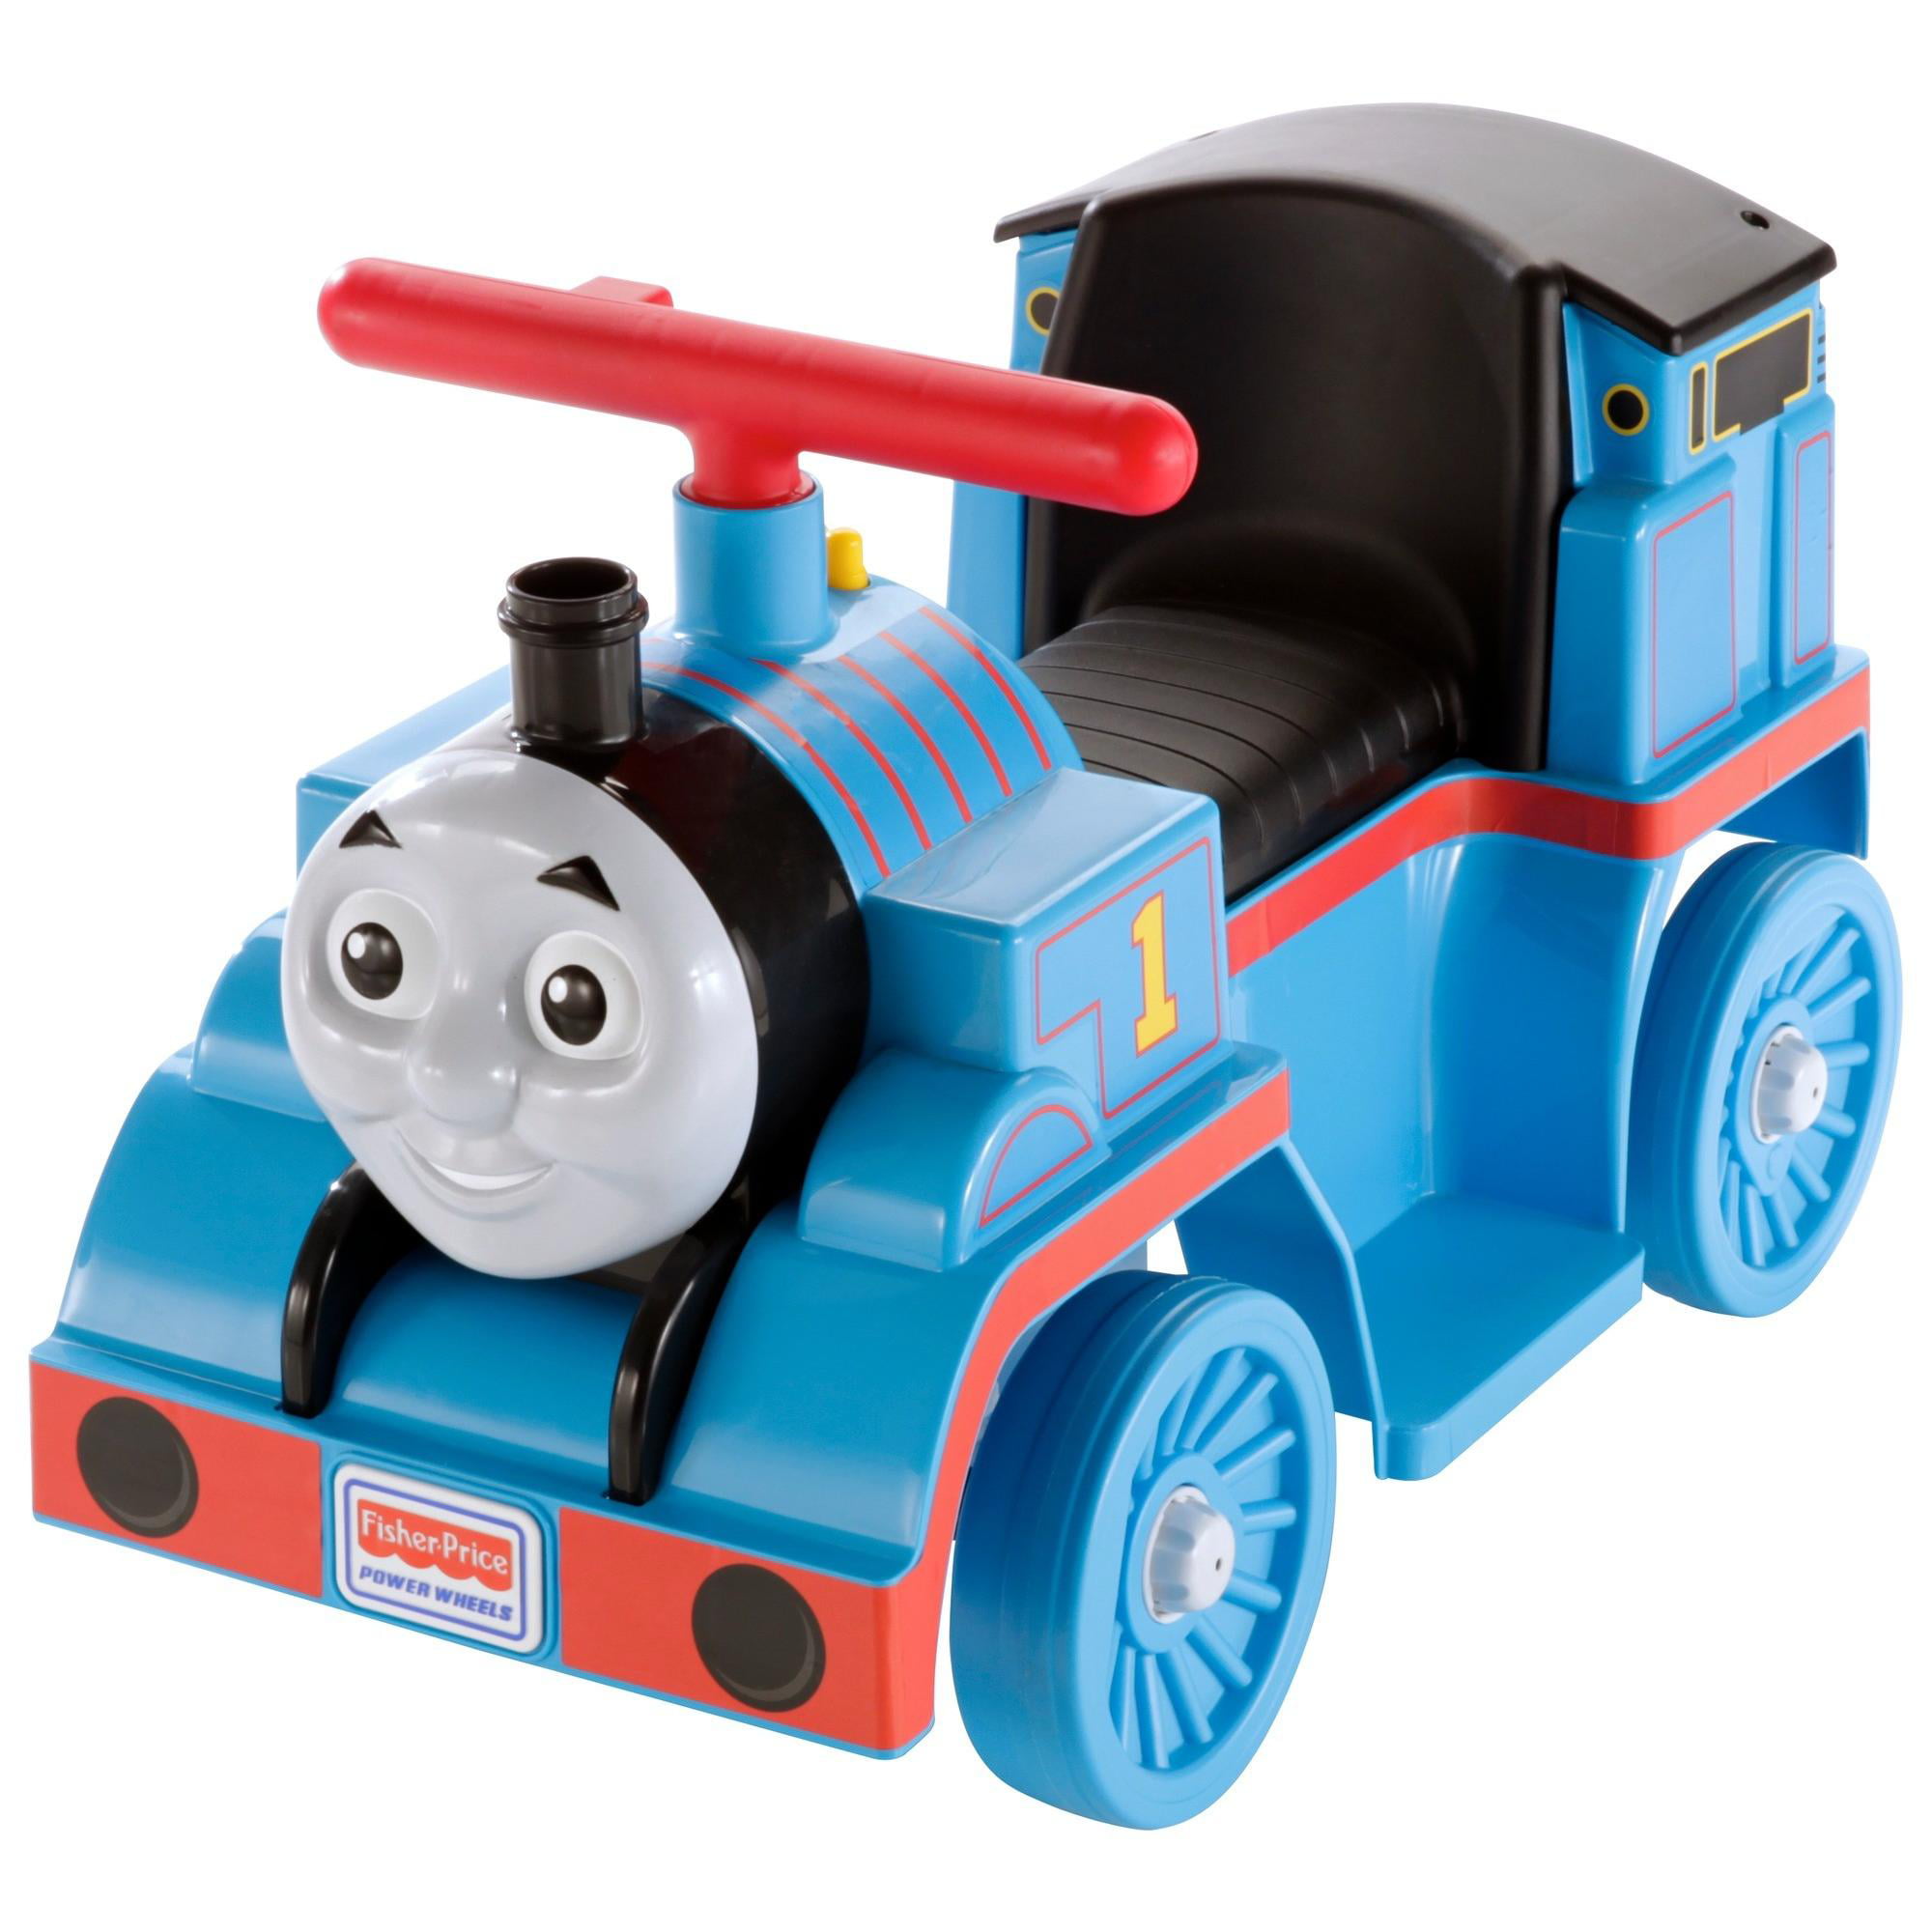 sit on thomas train and track